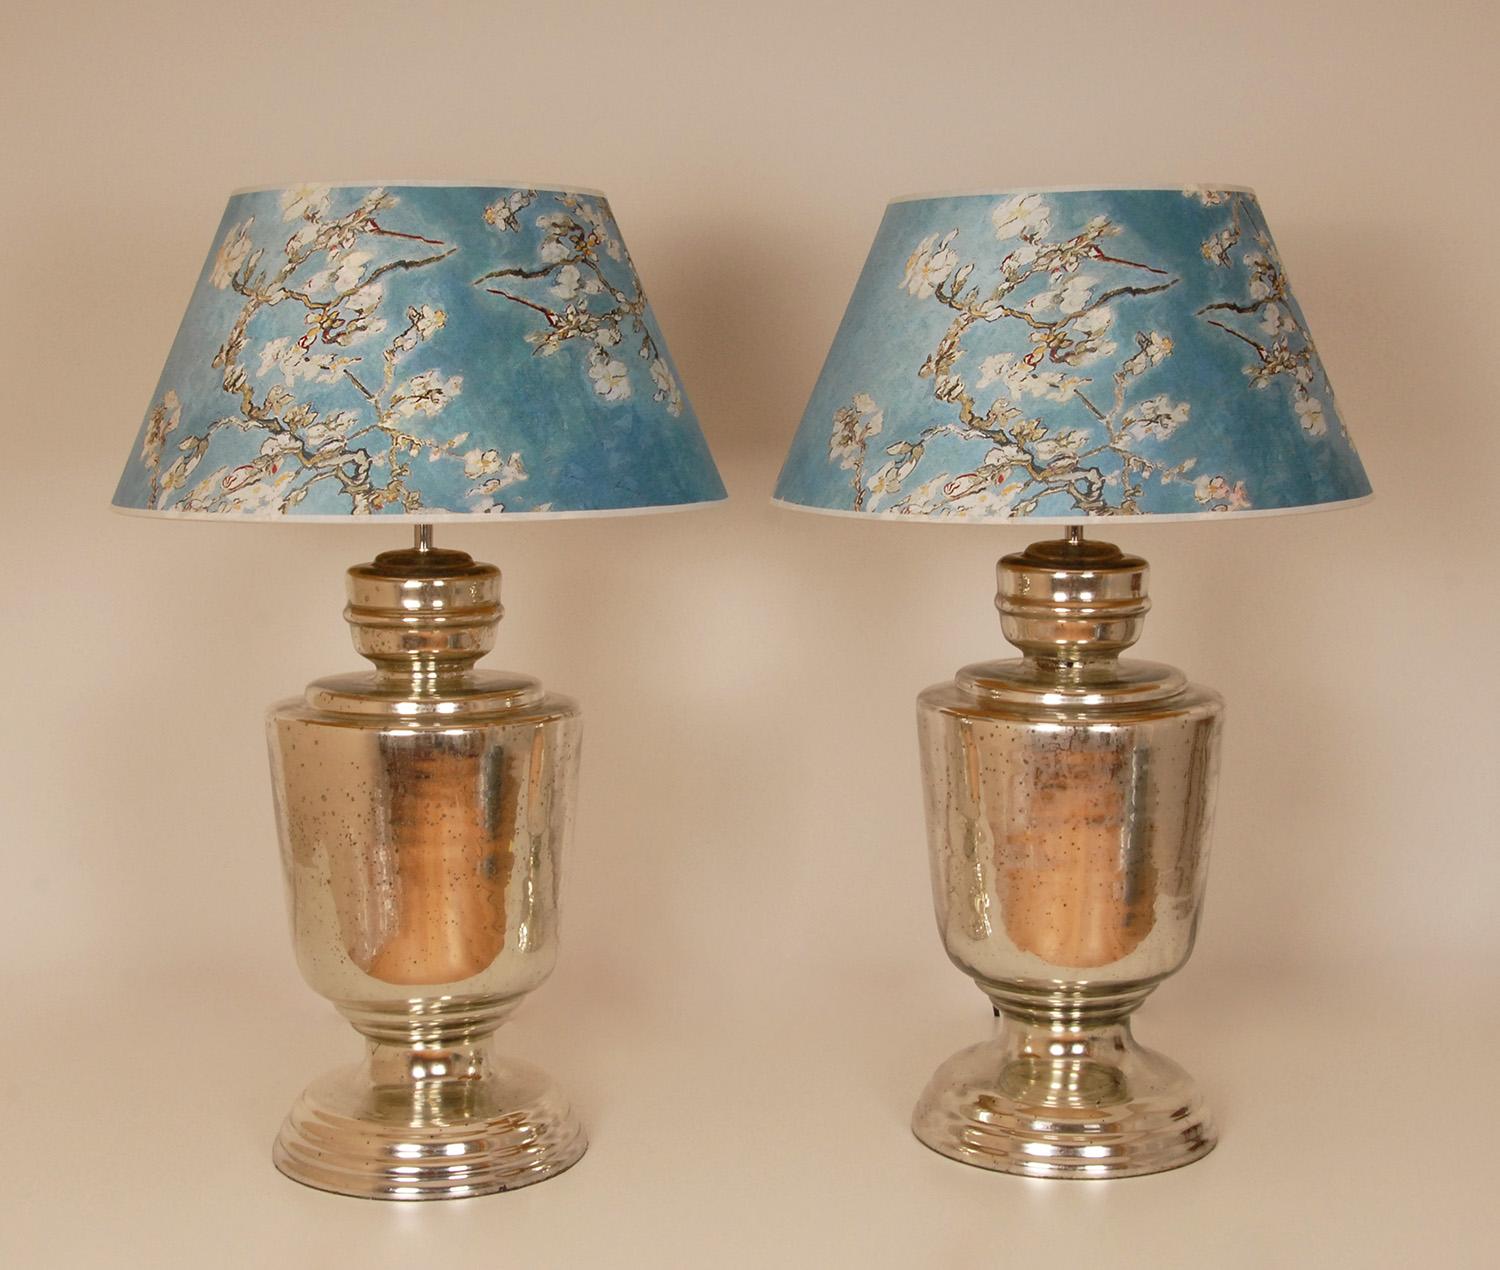 Vintage Tall Silver Table Lamps Silver and Sky Blue Modern Table Lamps Vase Lamp For Sale 2